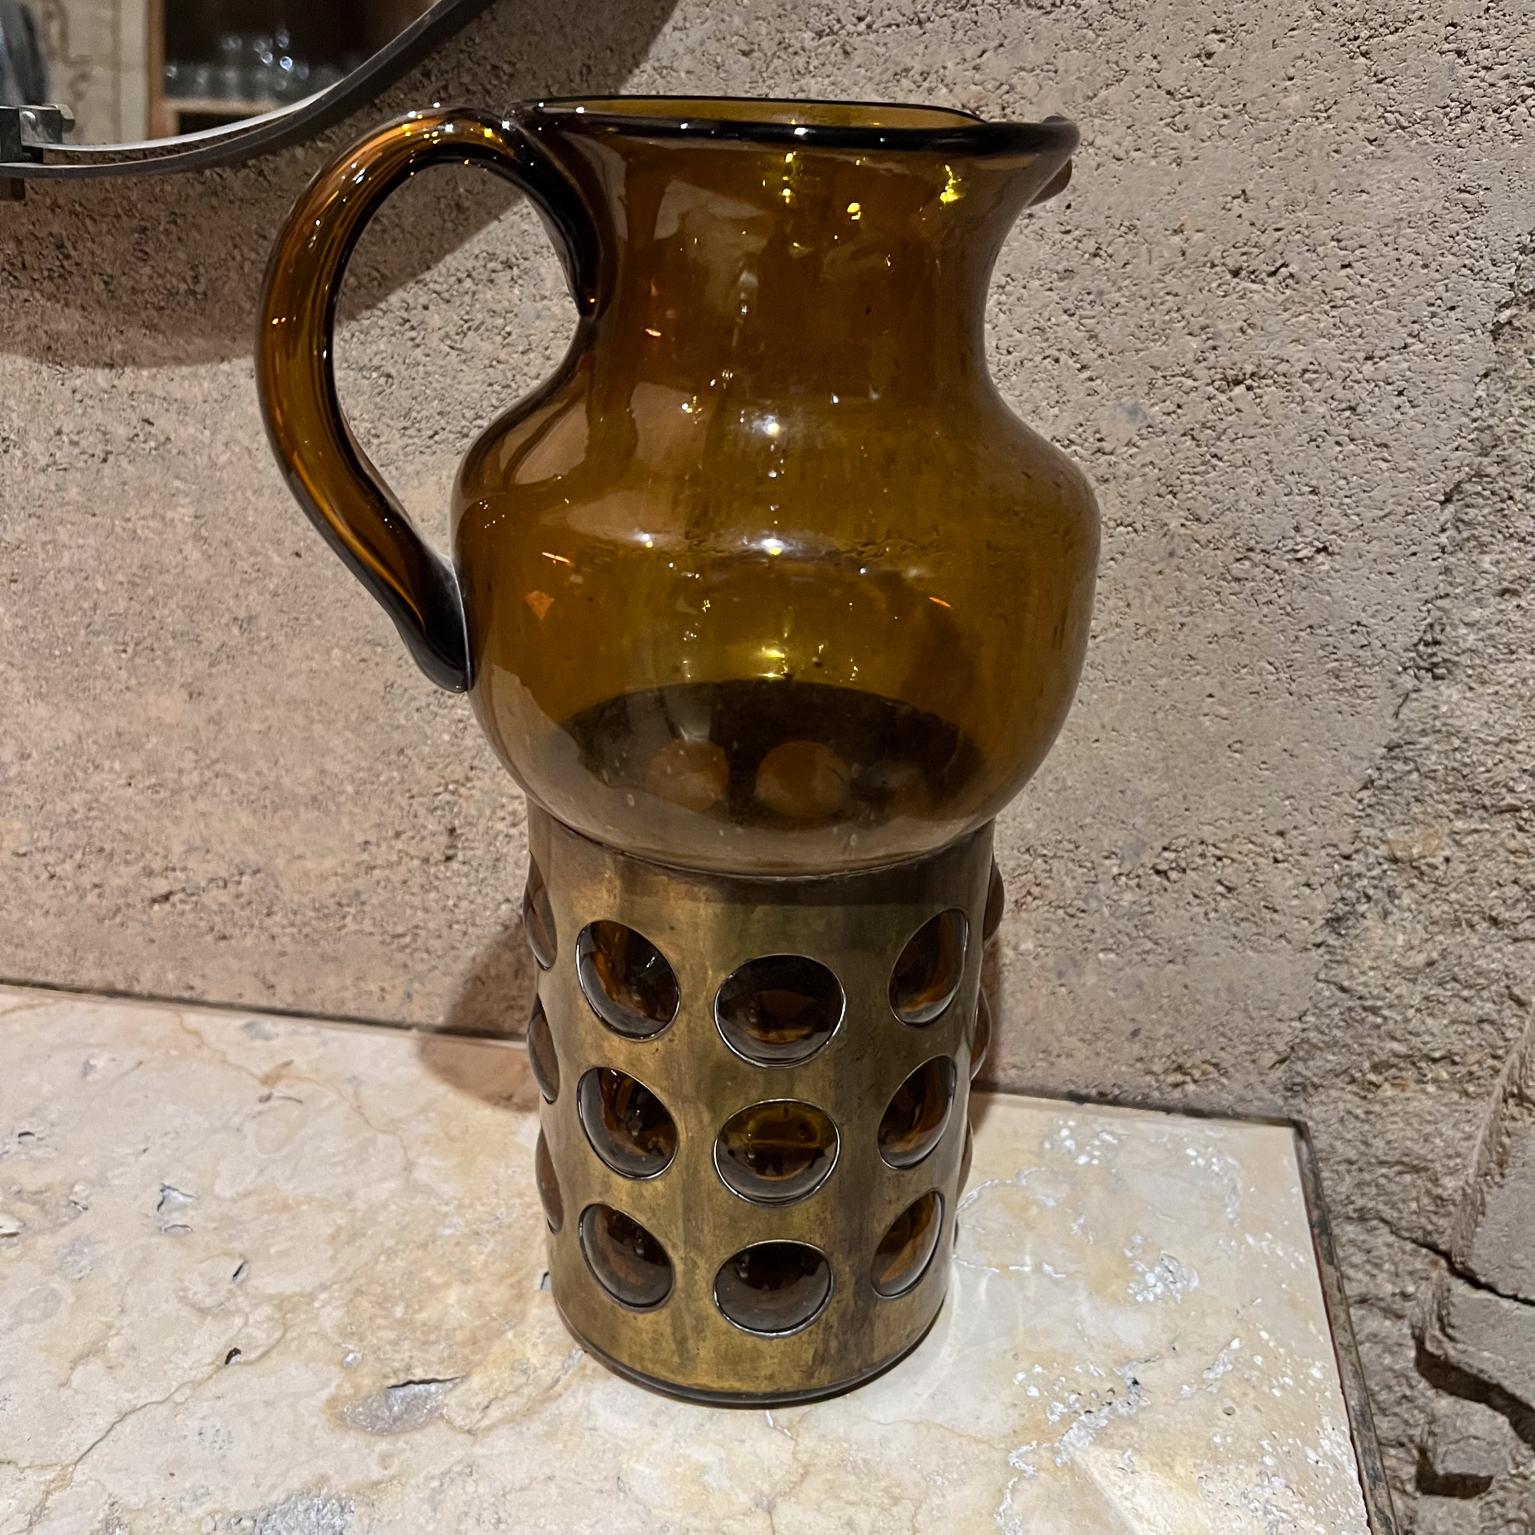 AMBIANIC presents
1960s Feders Felipe Delfinger Handblown Amber Caged Art Glass Pitcher Mexico
12 h x 6 diameter x 7.5 d
Preowned original good vintage condition.
Ready for use!
Refer to all images.